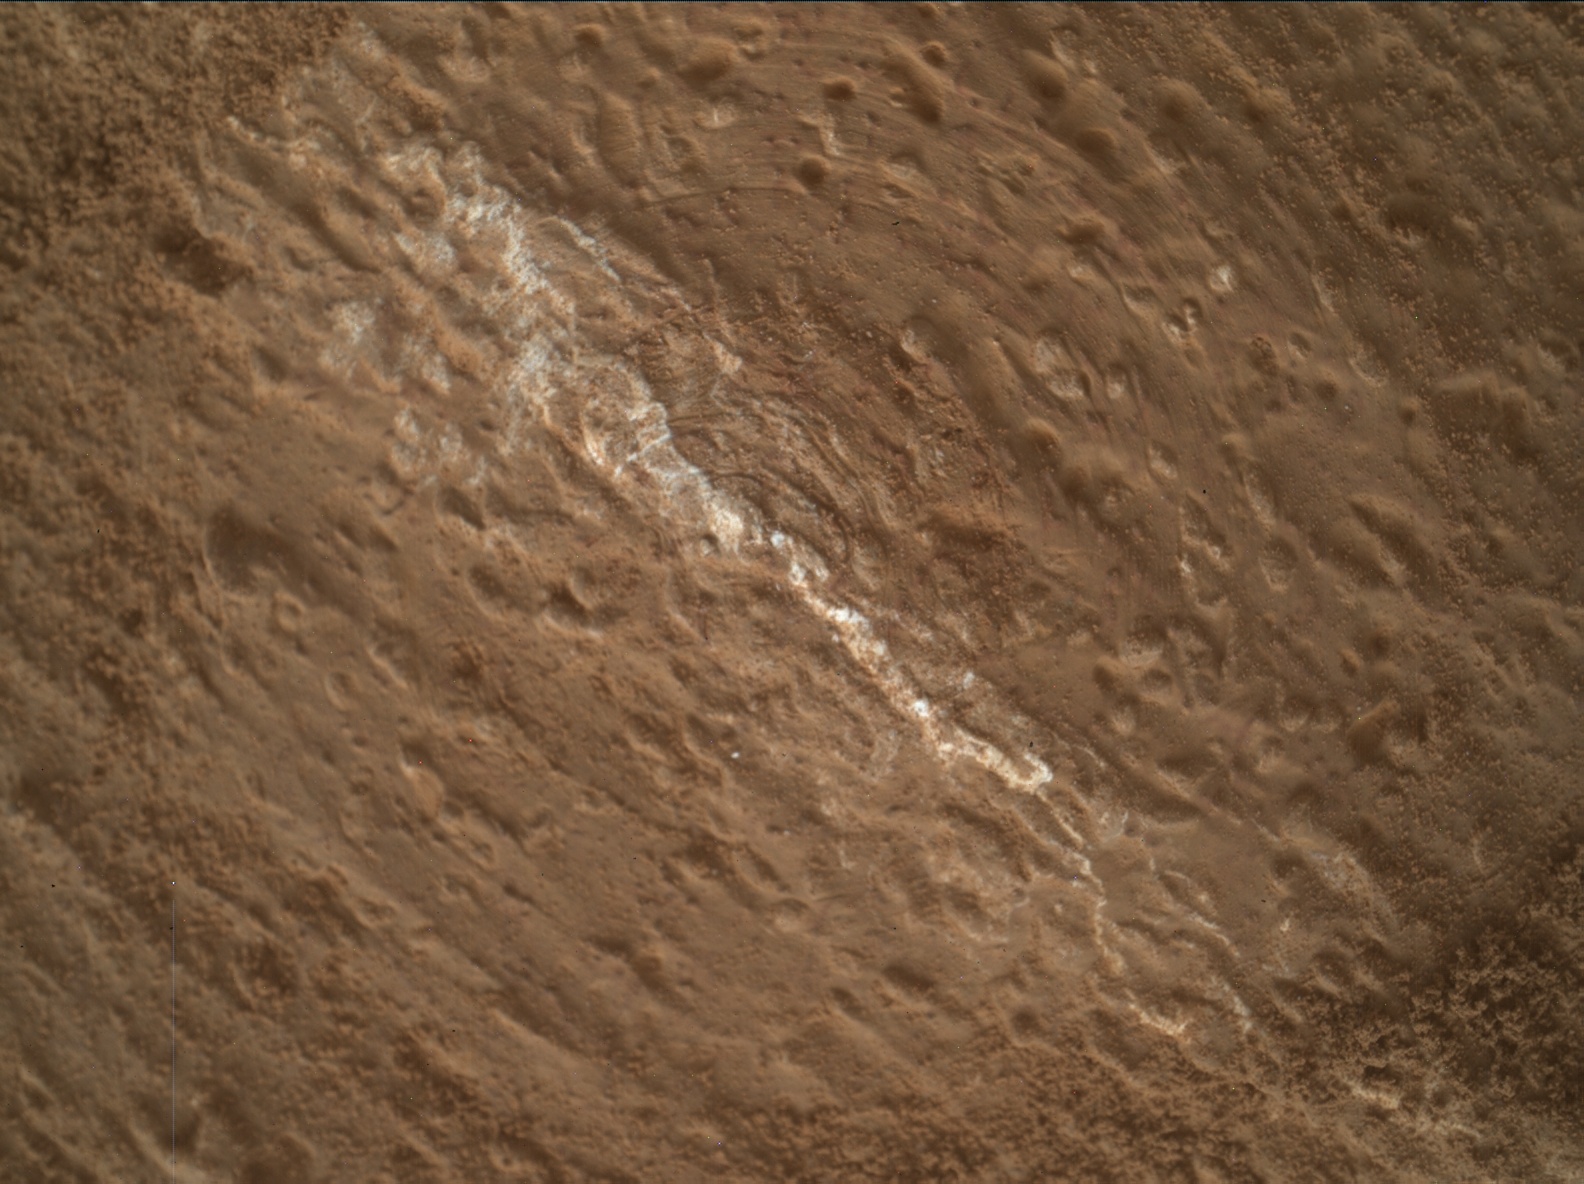 Nasa's Mars rover Curiosity acquired this image using its Mars Hand Lens Imager (MAHLI) on Sol 3276